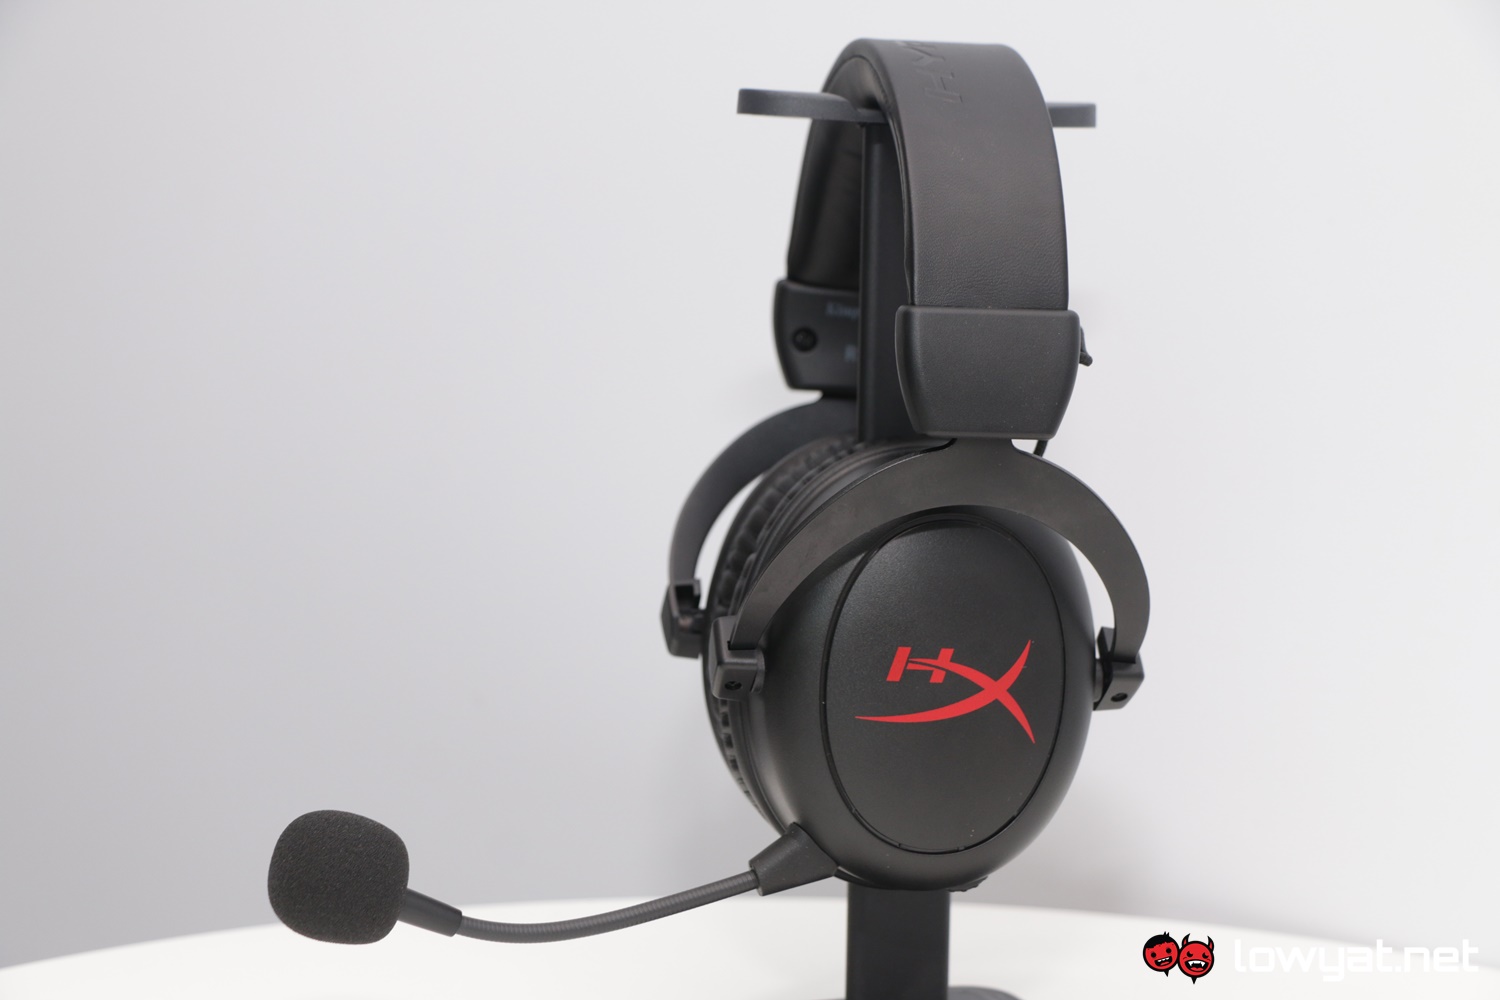 A month-long review of the Cloud III gaming headset from HyperX 